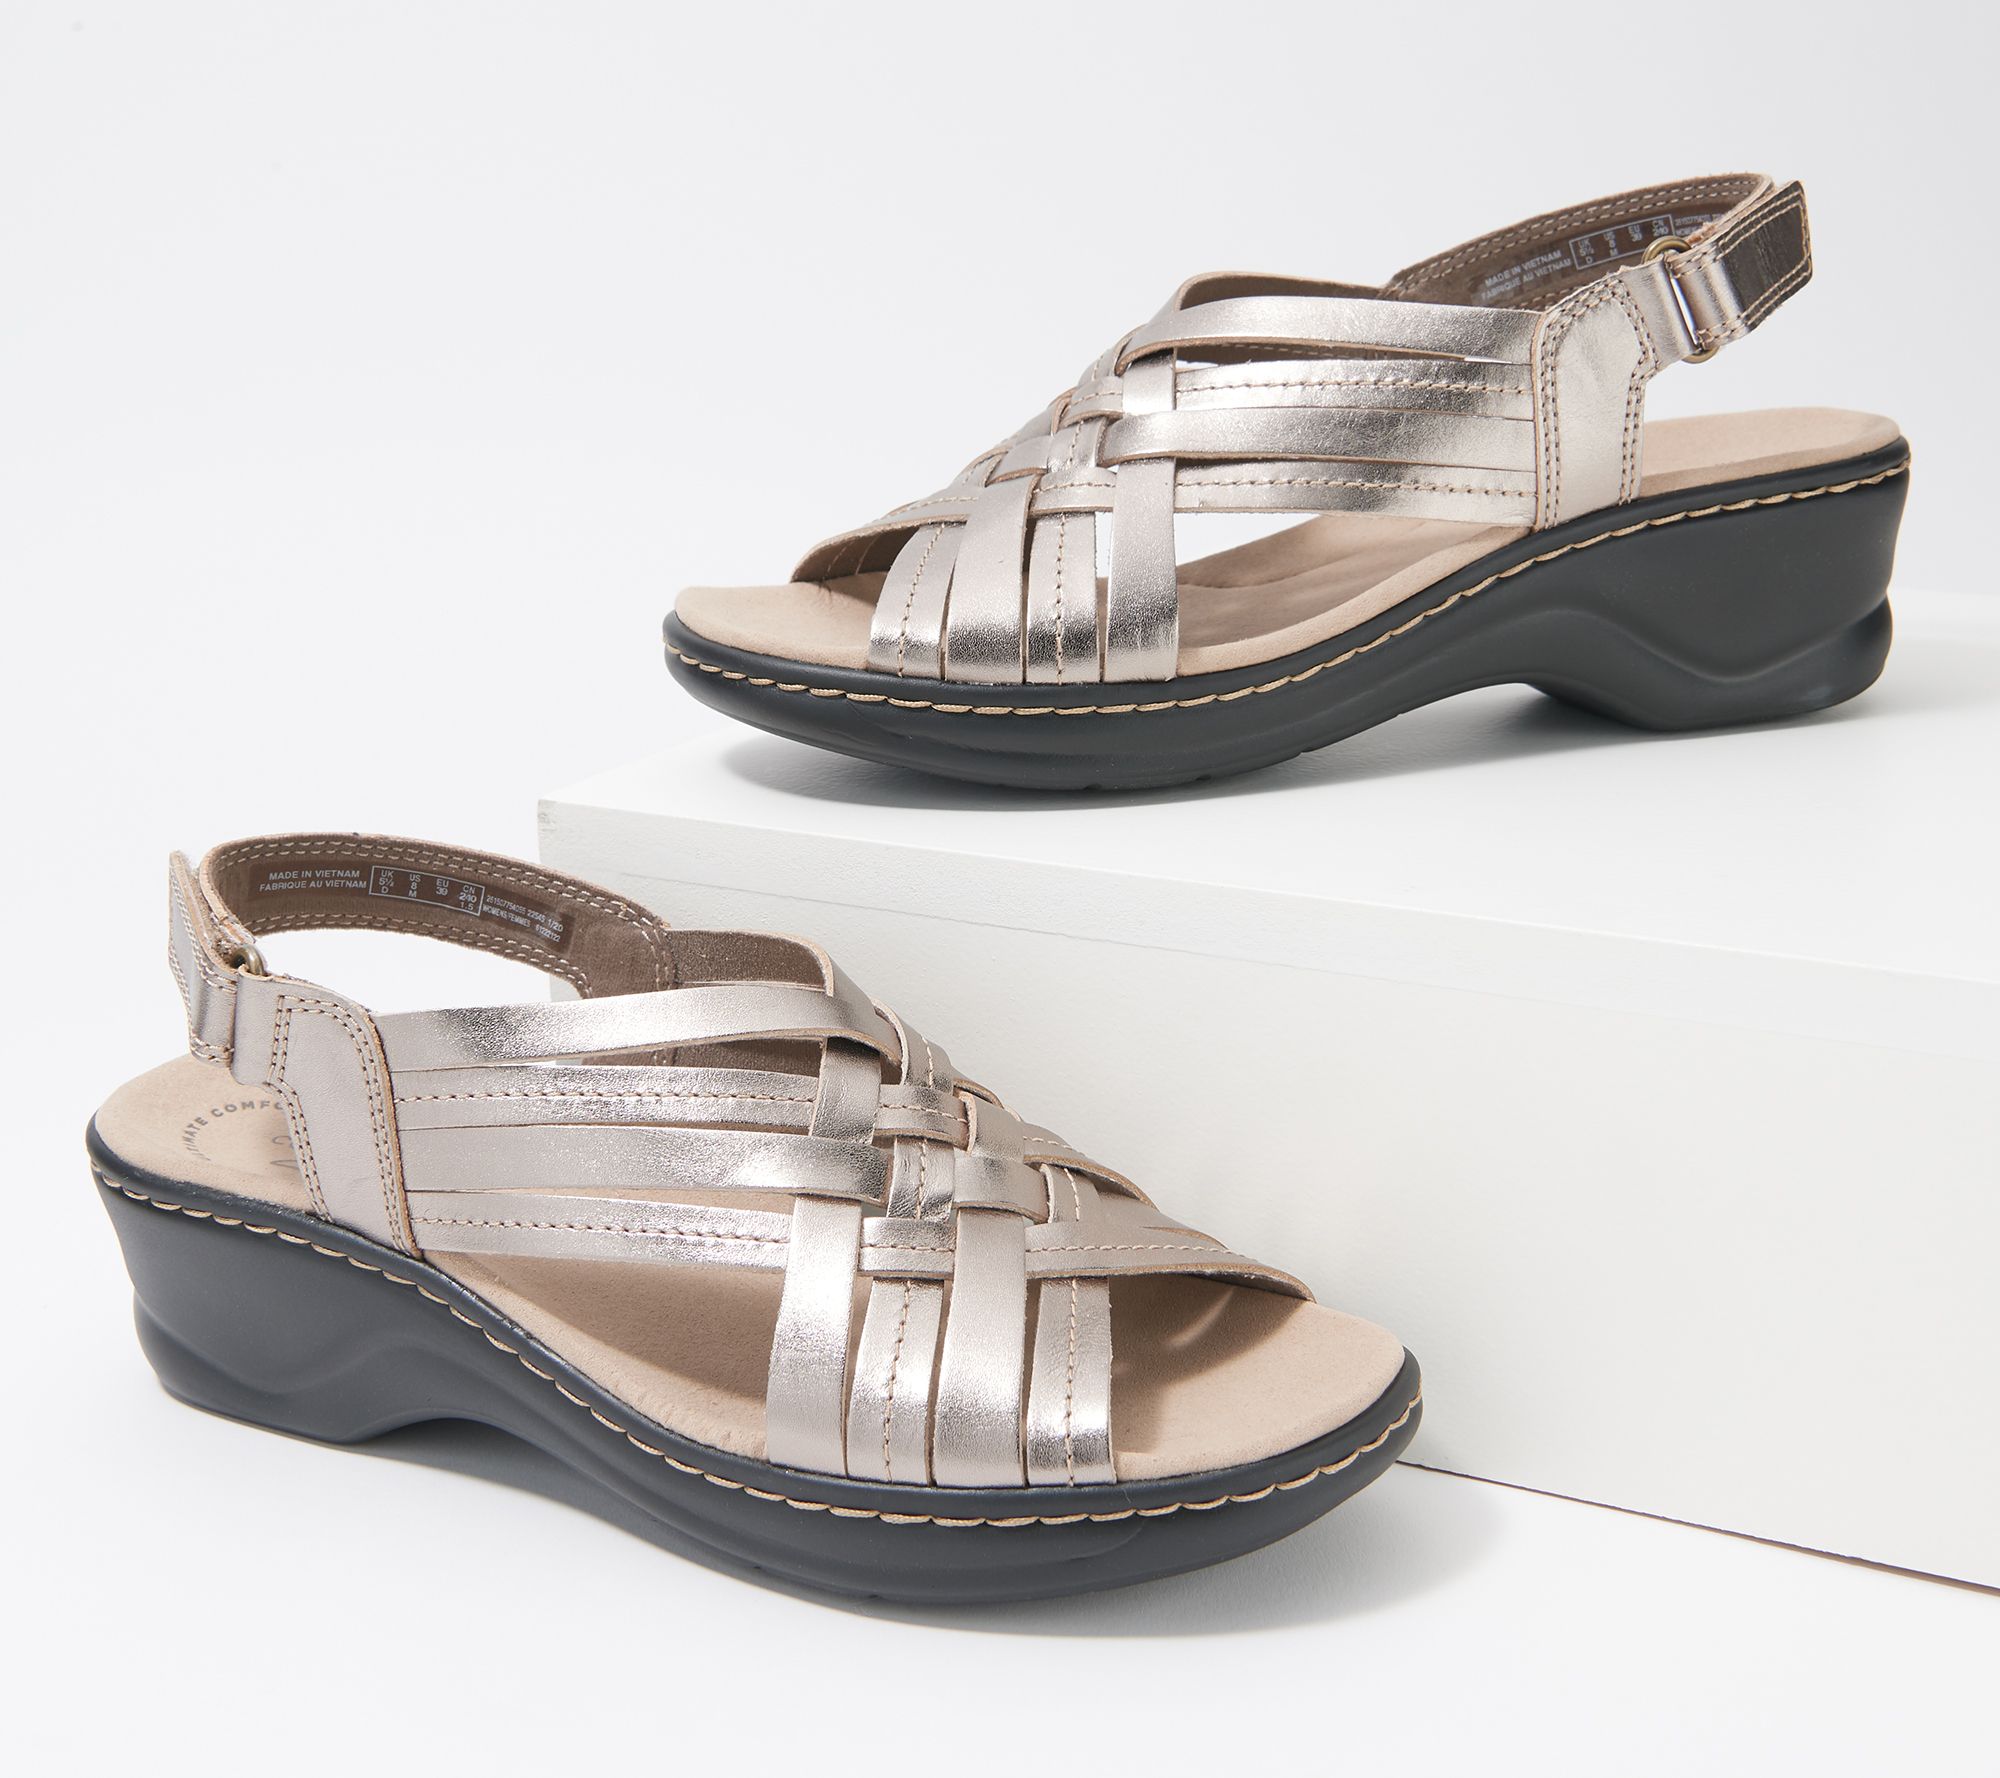 As Is" Clarks Collection Woven Leather Sandals - Lexi Carmen -